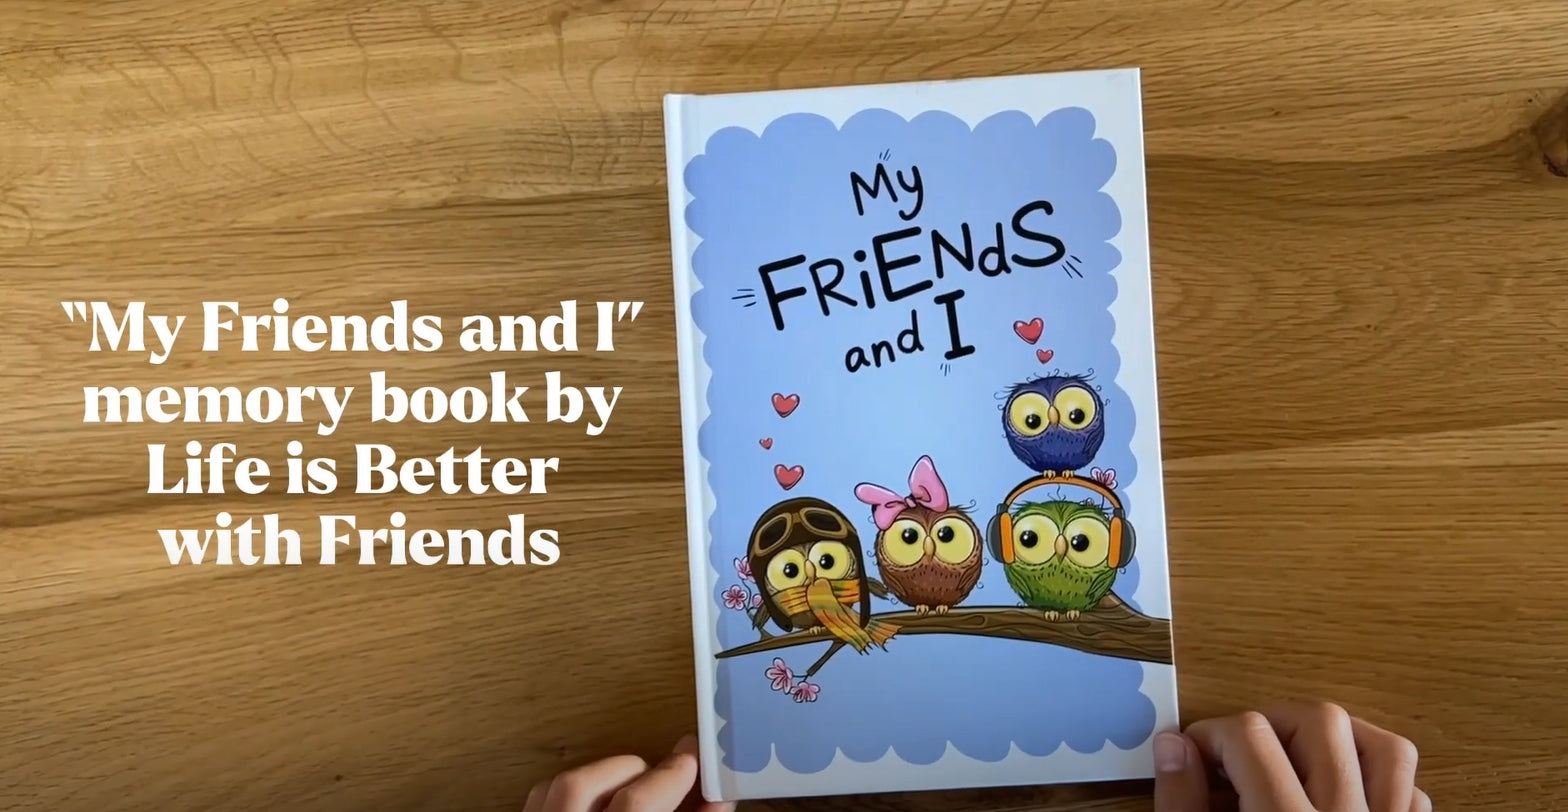 Load video: &#39;My Friends and I&#39; memory book and how to use it.